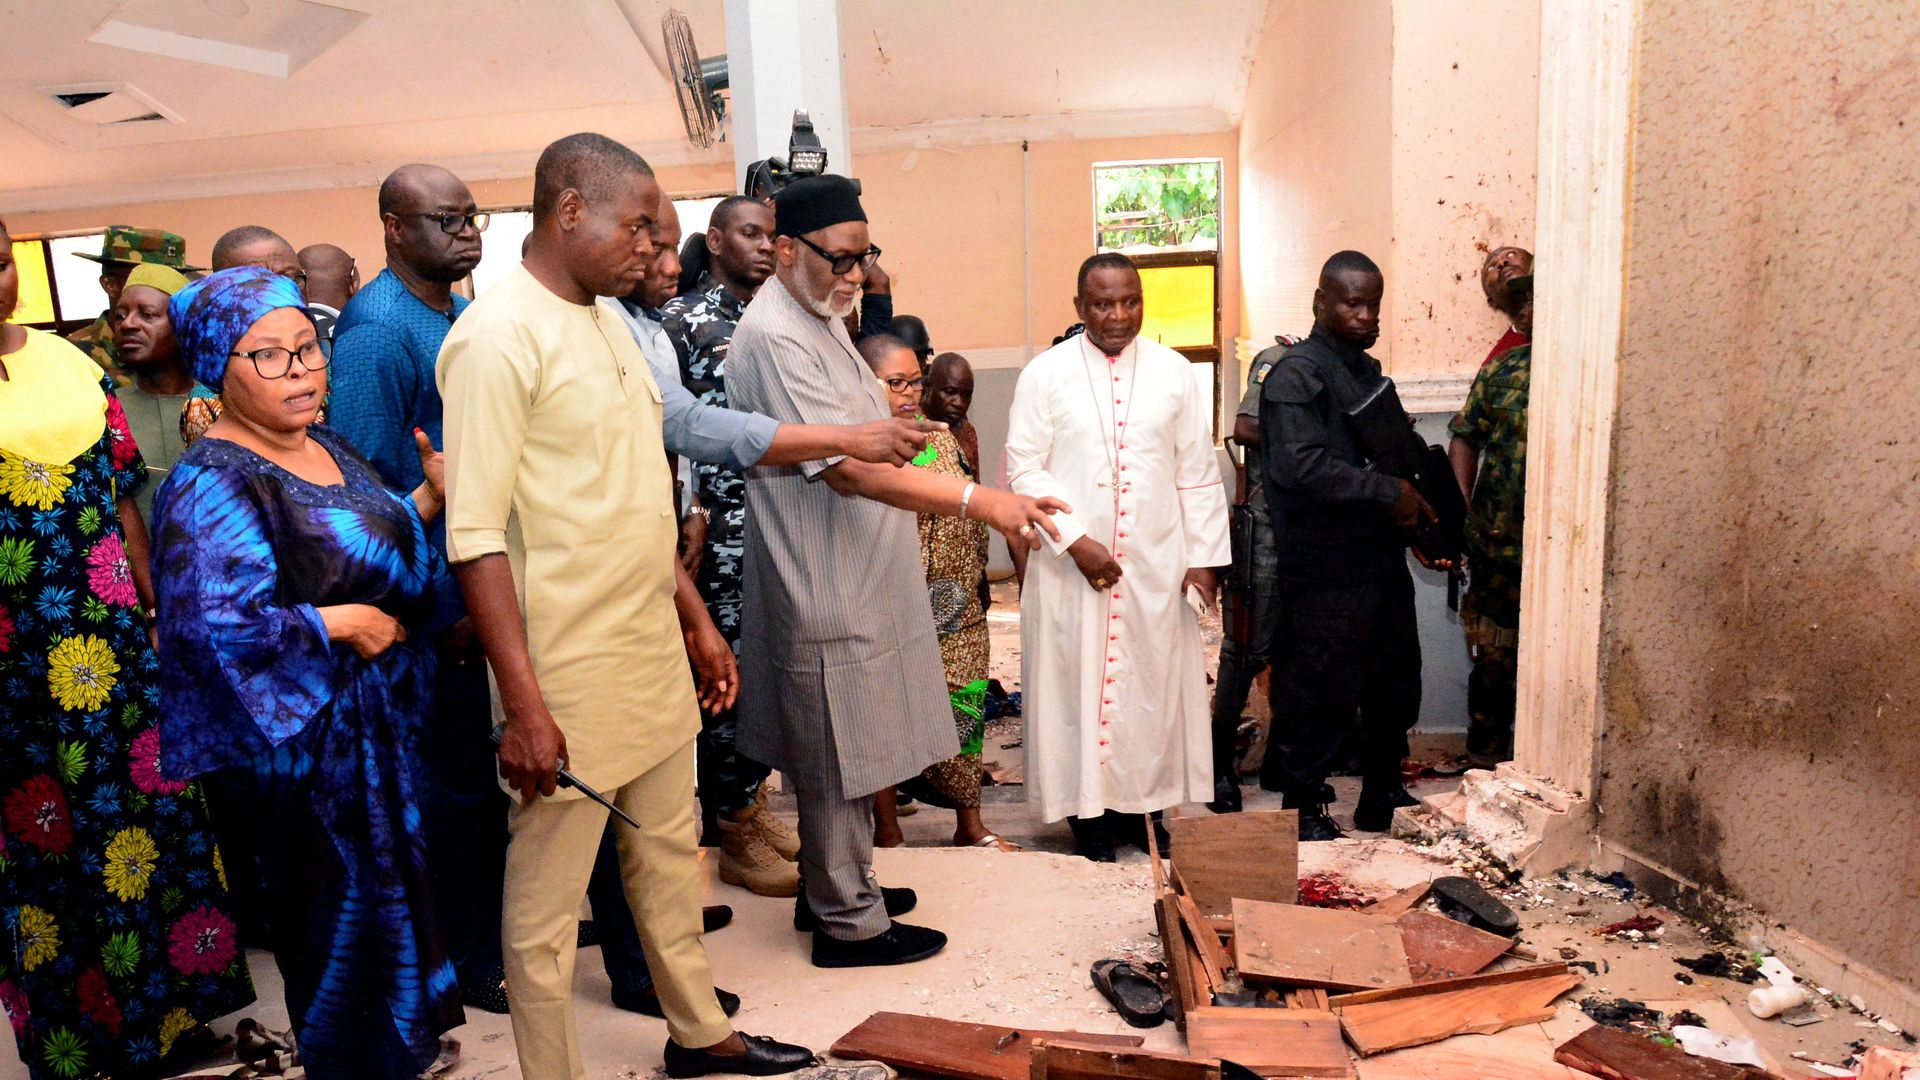 - Ondo State governor Rotimi Akeredolu (3rd L) points to blood the stained floor after an attack by gunmen at St. Francis Catholic Church in Owo town,